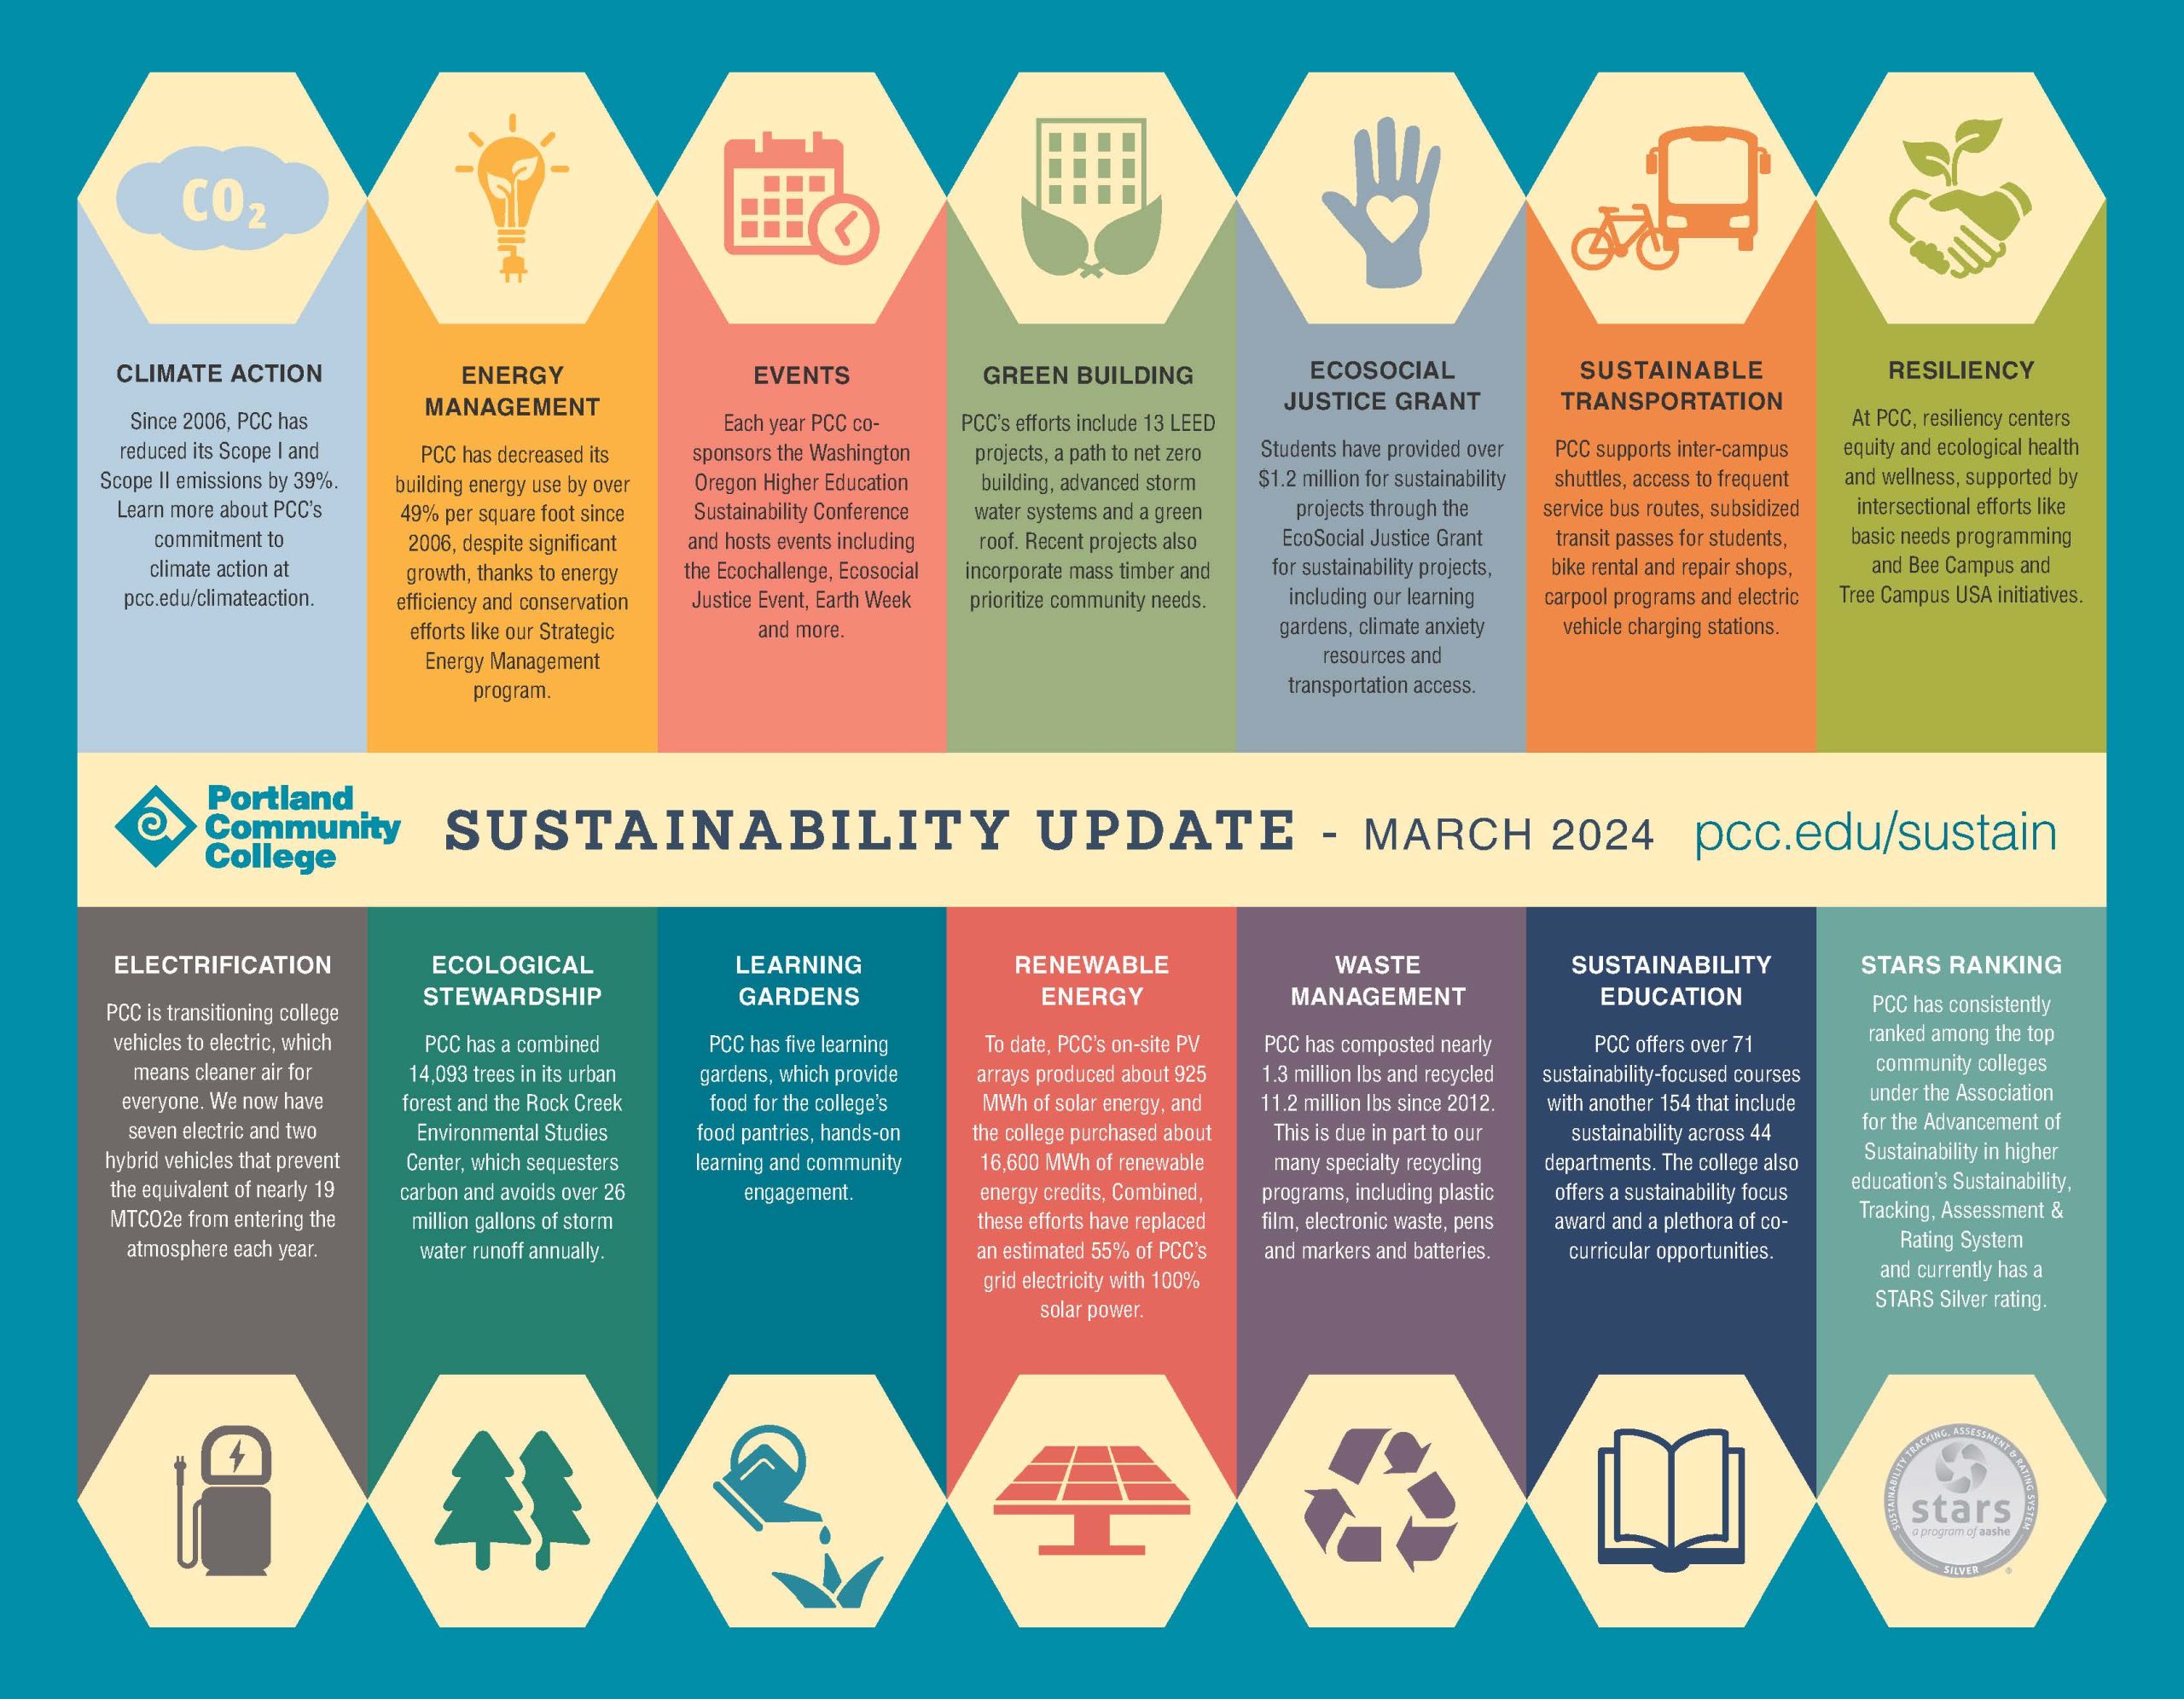 This is PCC's Sustainability Update dated March 2024. It is an art file. The pdf file is available as an accessible pdf in the next link. If there is an issue accessing this document, please email us at sustainability@pcc.edu.